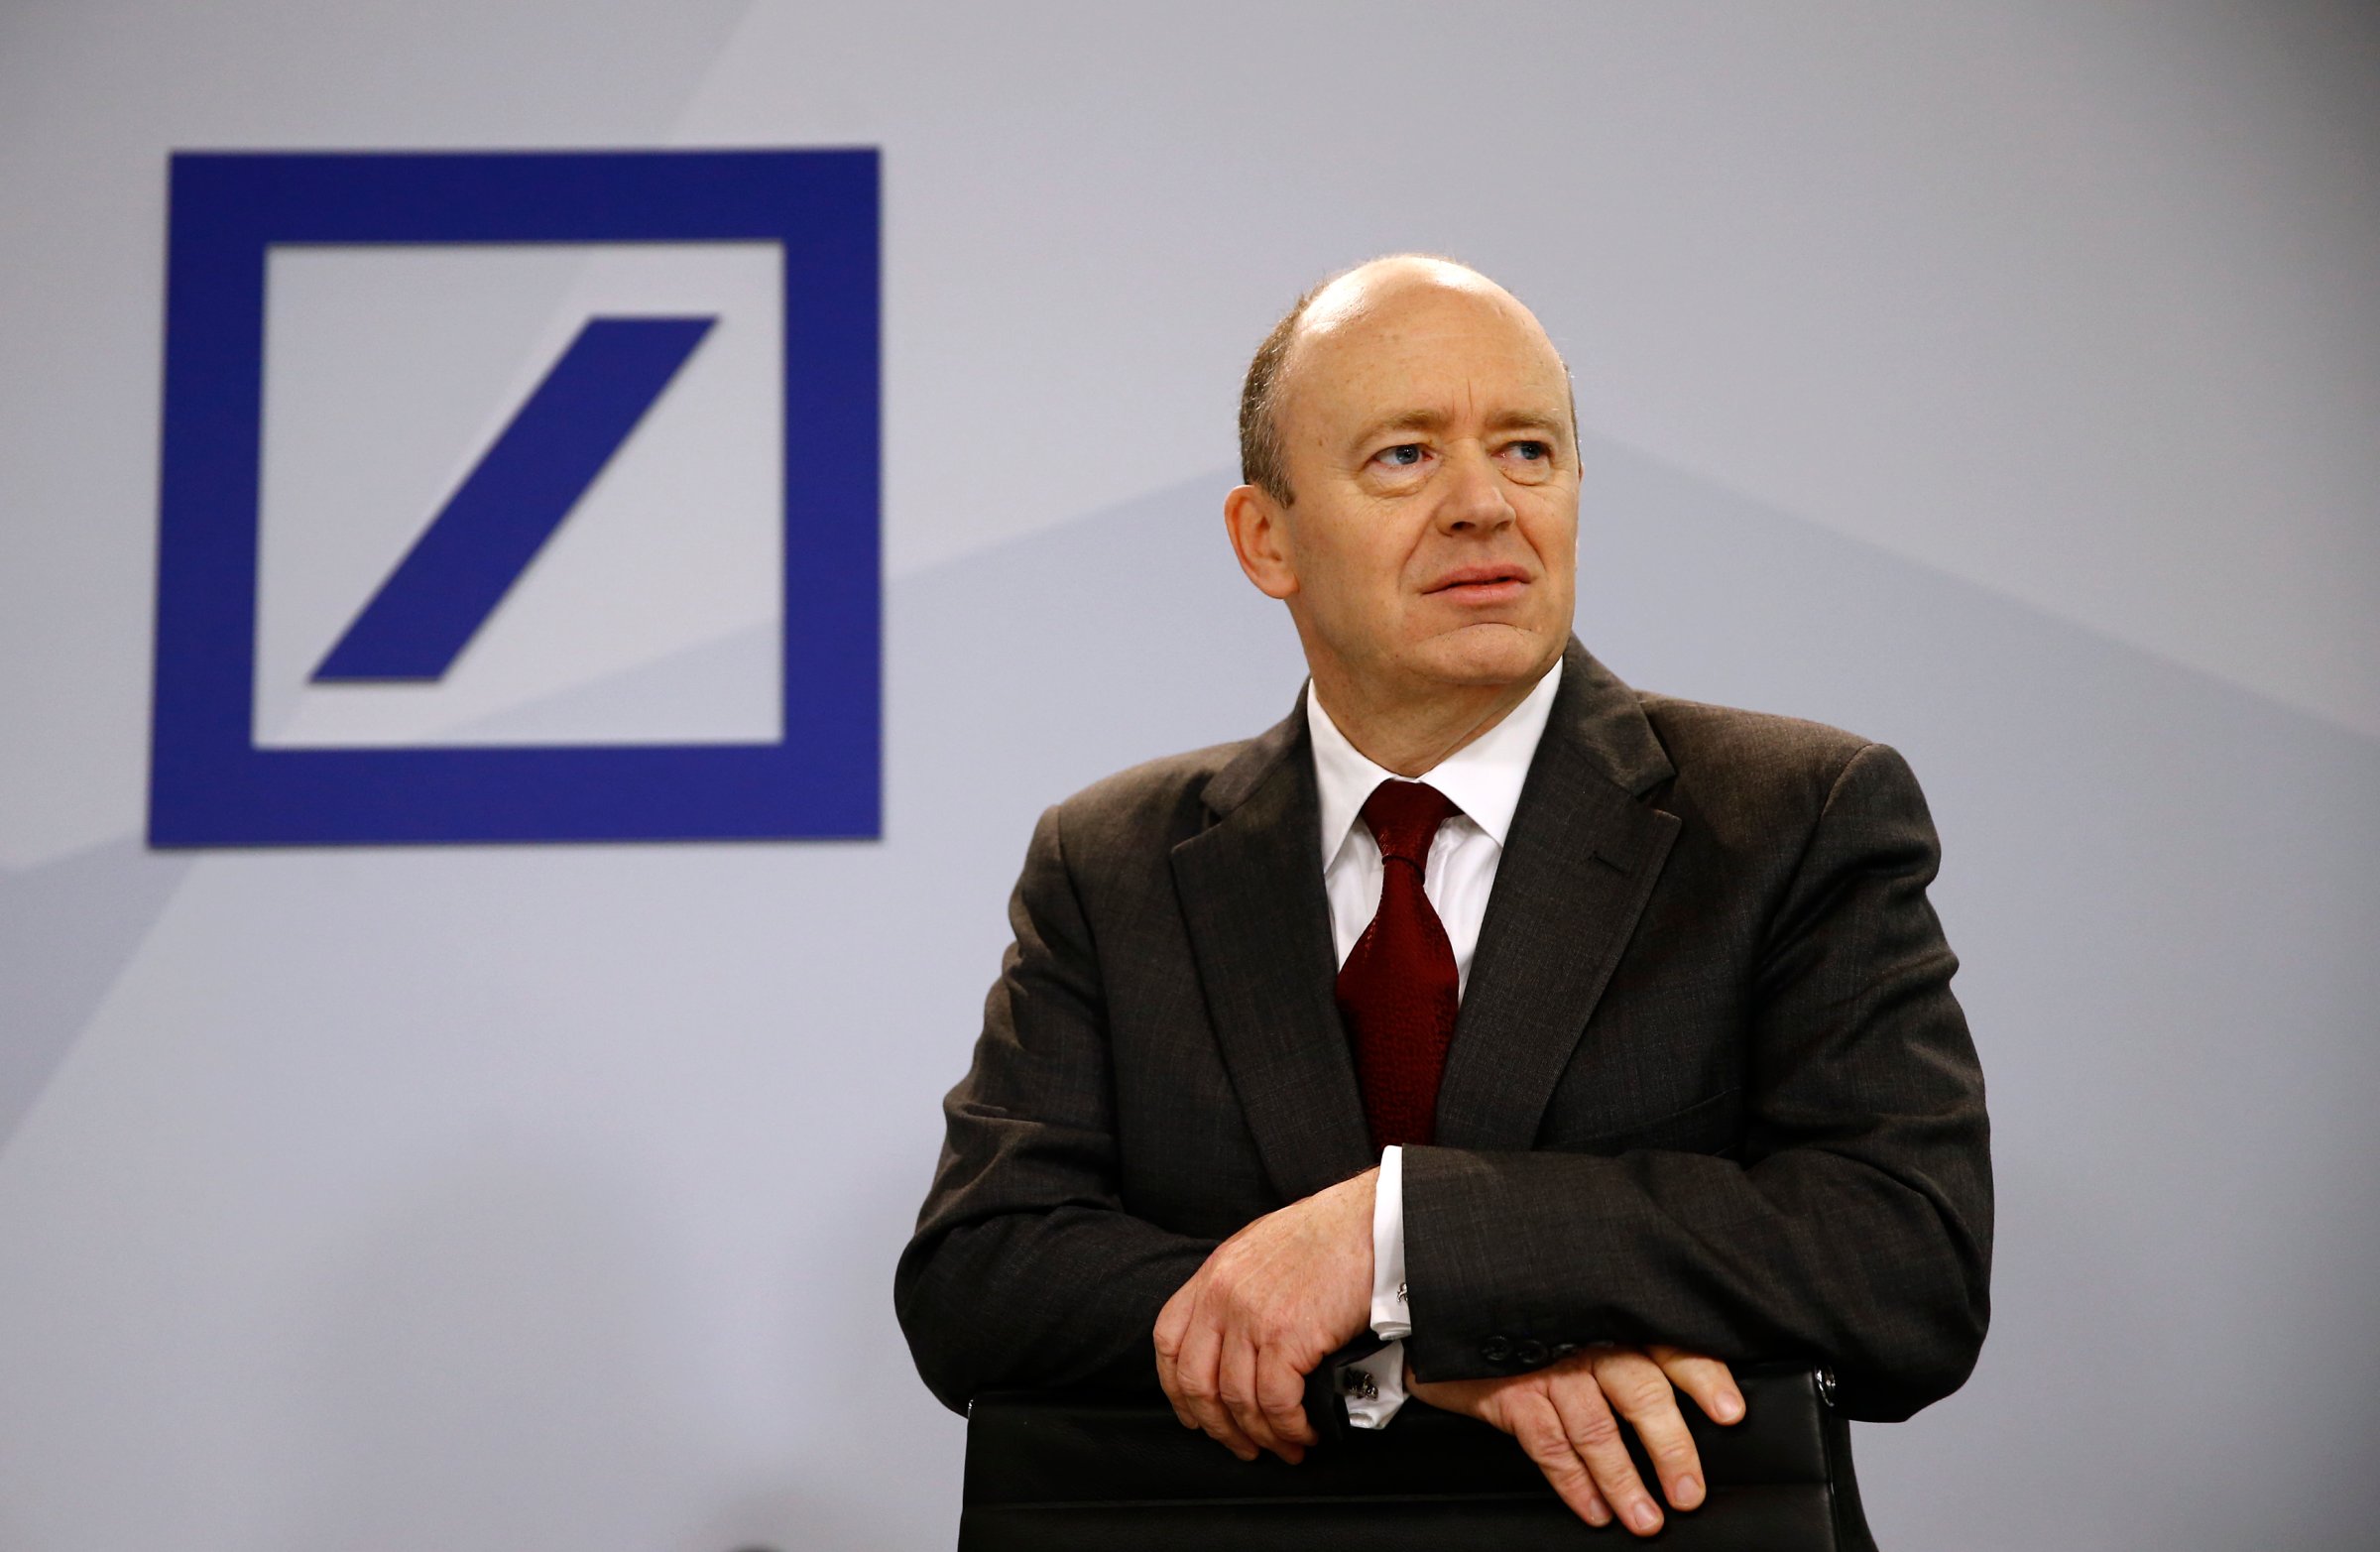 Deutsche Bank new Chief Executive John Cryan arrives for a news conference in Frankfurt